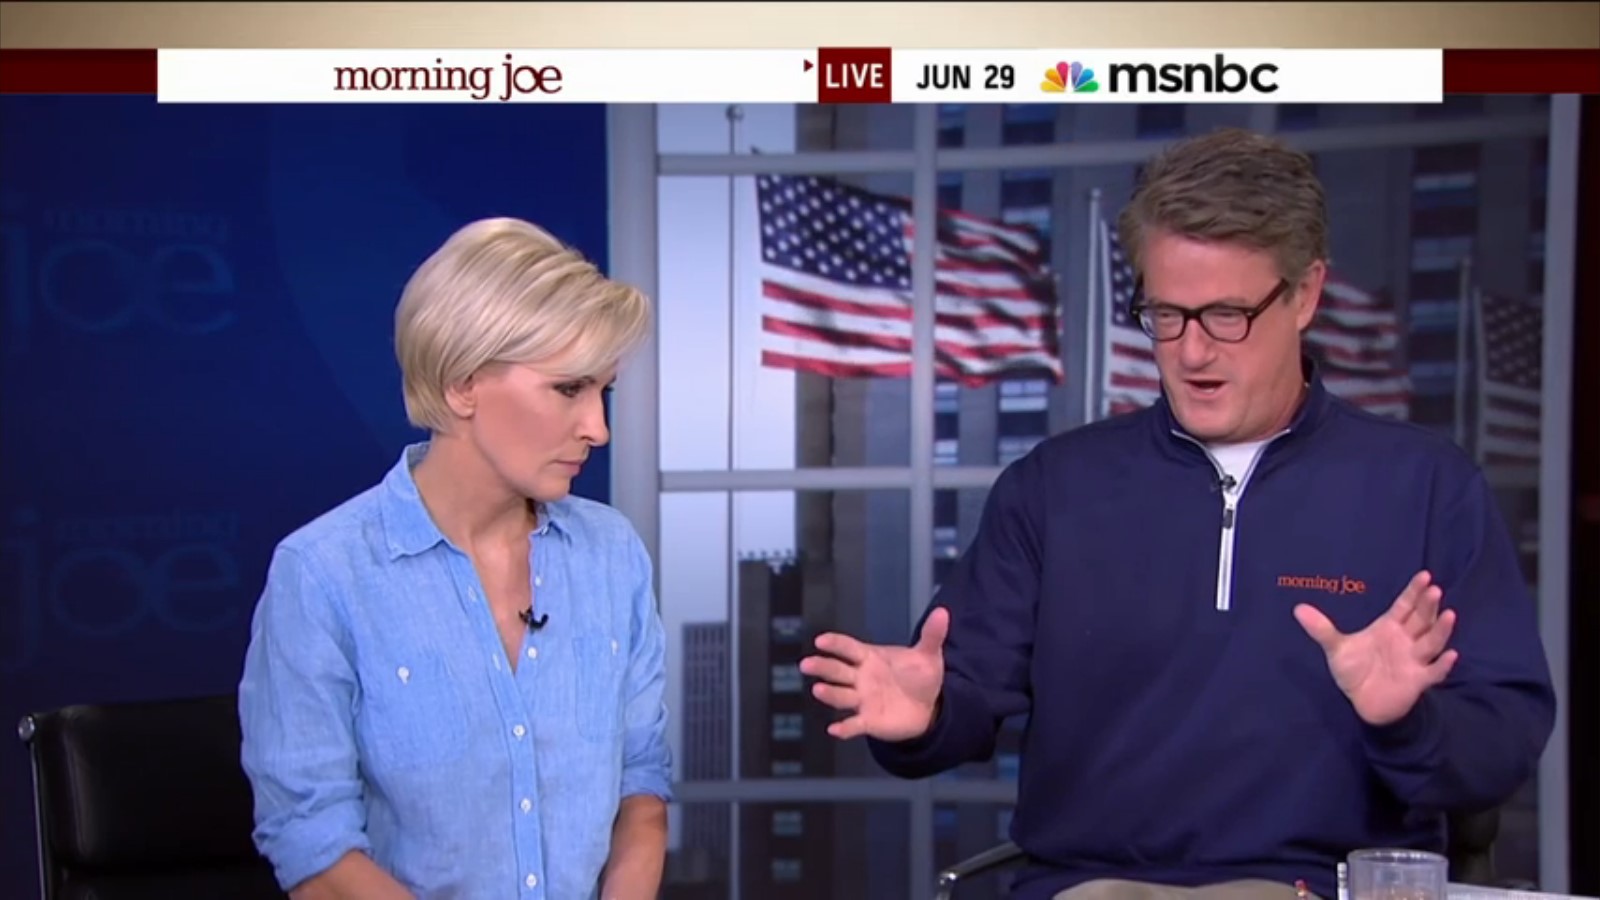 U Mad, Bro? Joe Scarborough Feels White House Shouldn’t Take Credit For Same-Sex Marriage